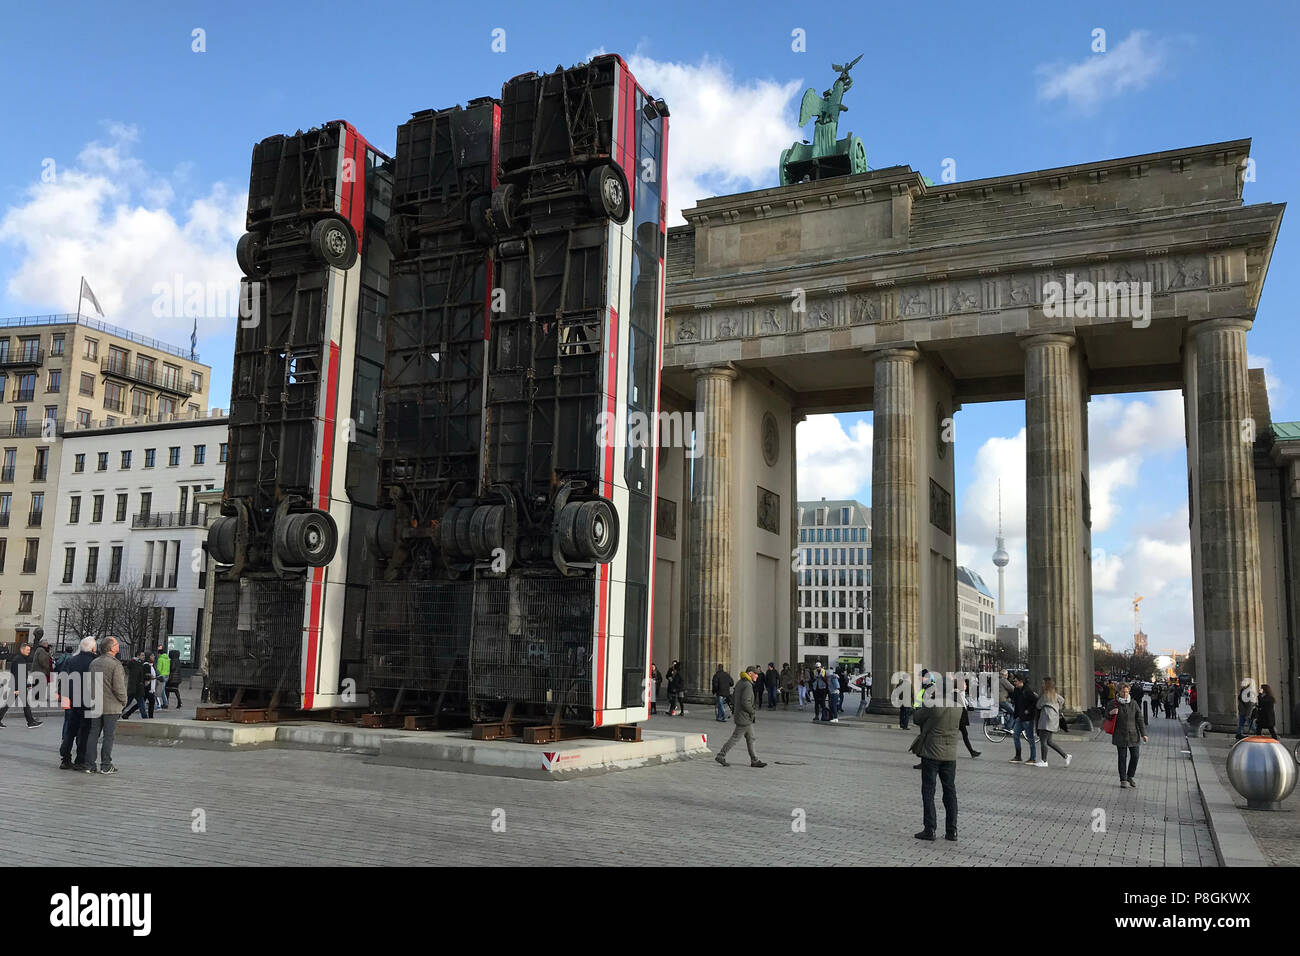 Berlin, Germany, anti-war sculpture Monument by the German-Syrian artist Manaf Halbouni in front of the Brandenburg Gate Stock Photo